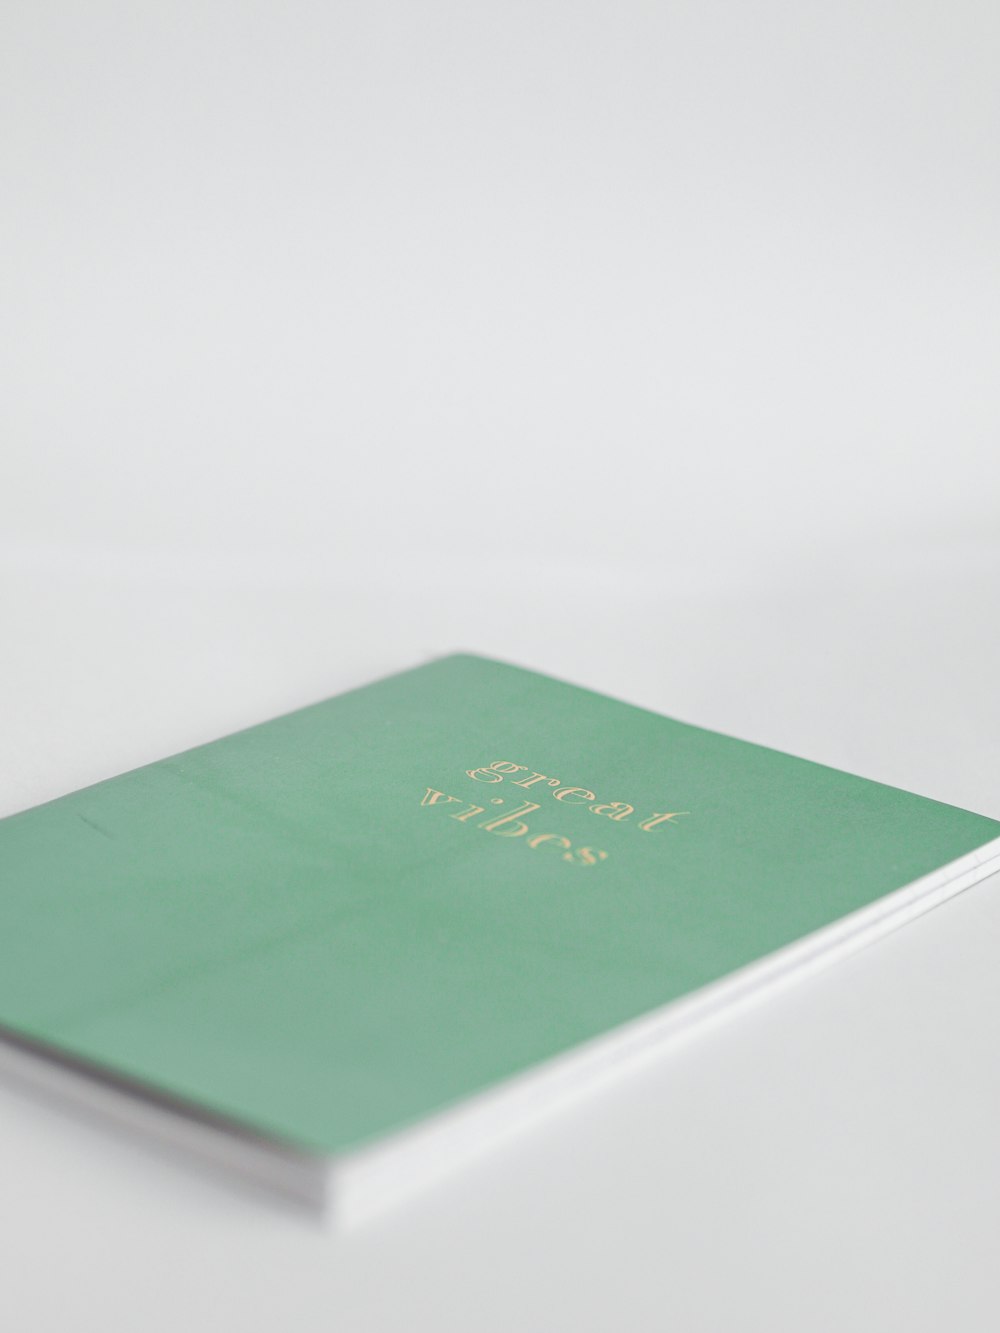 green book on white table